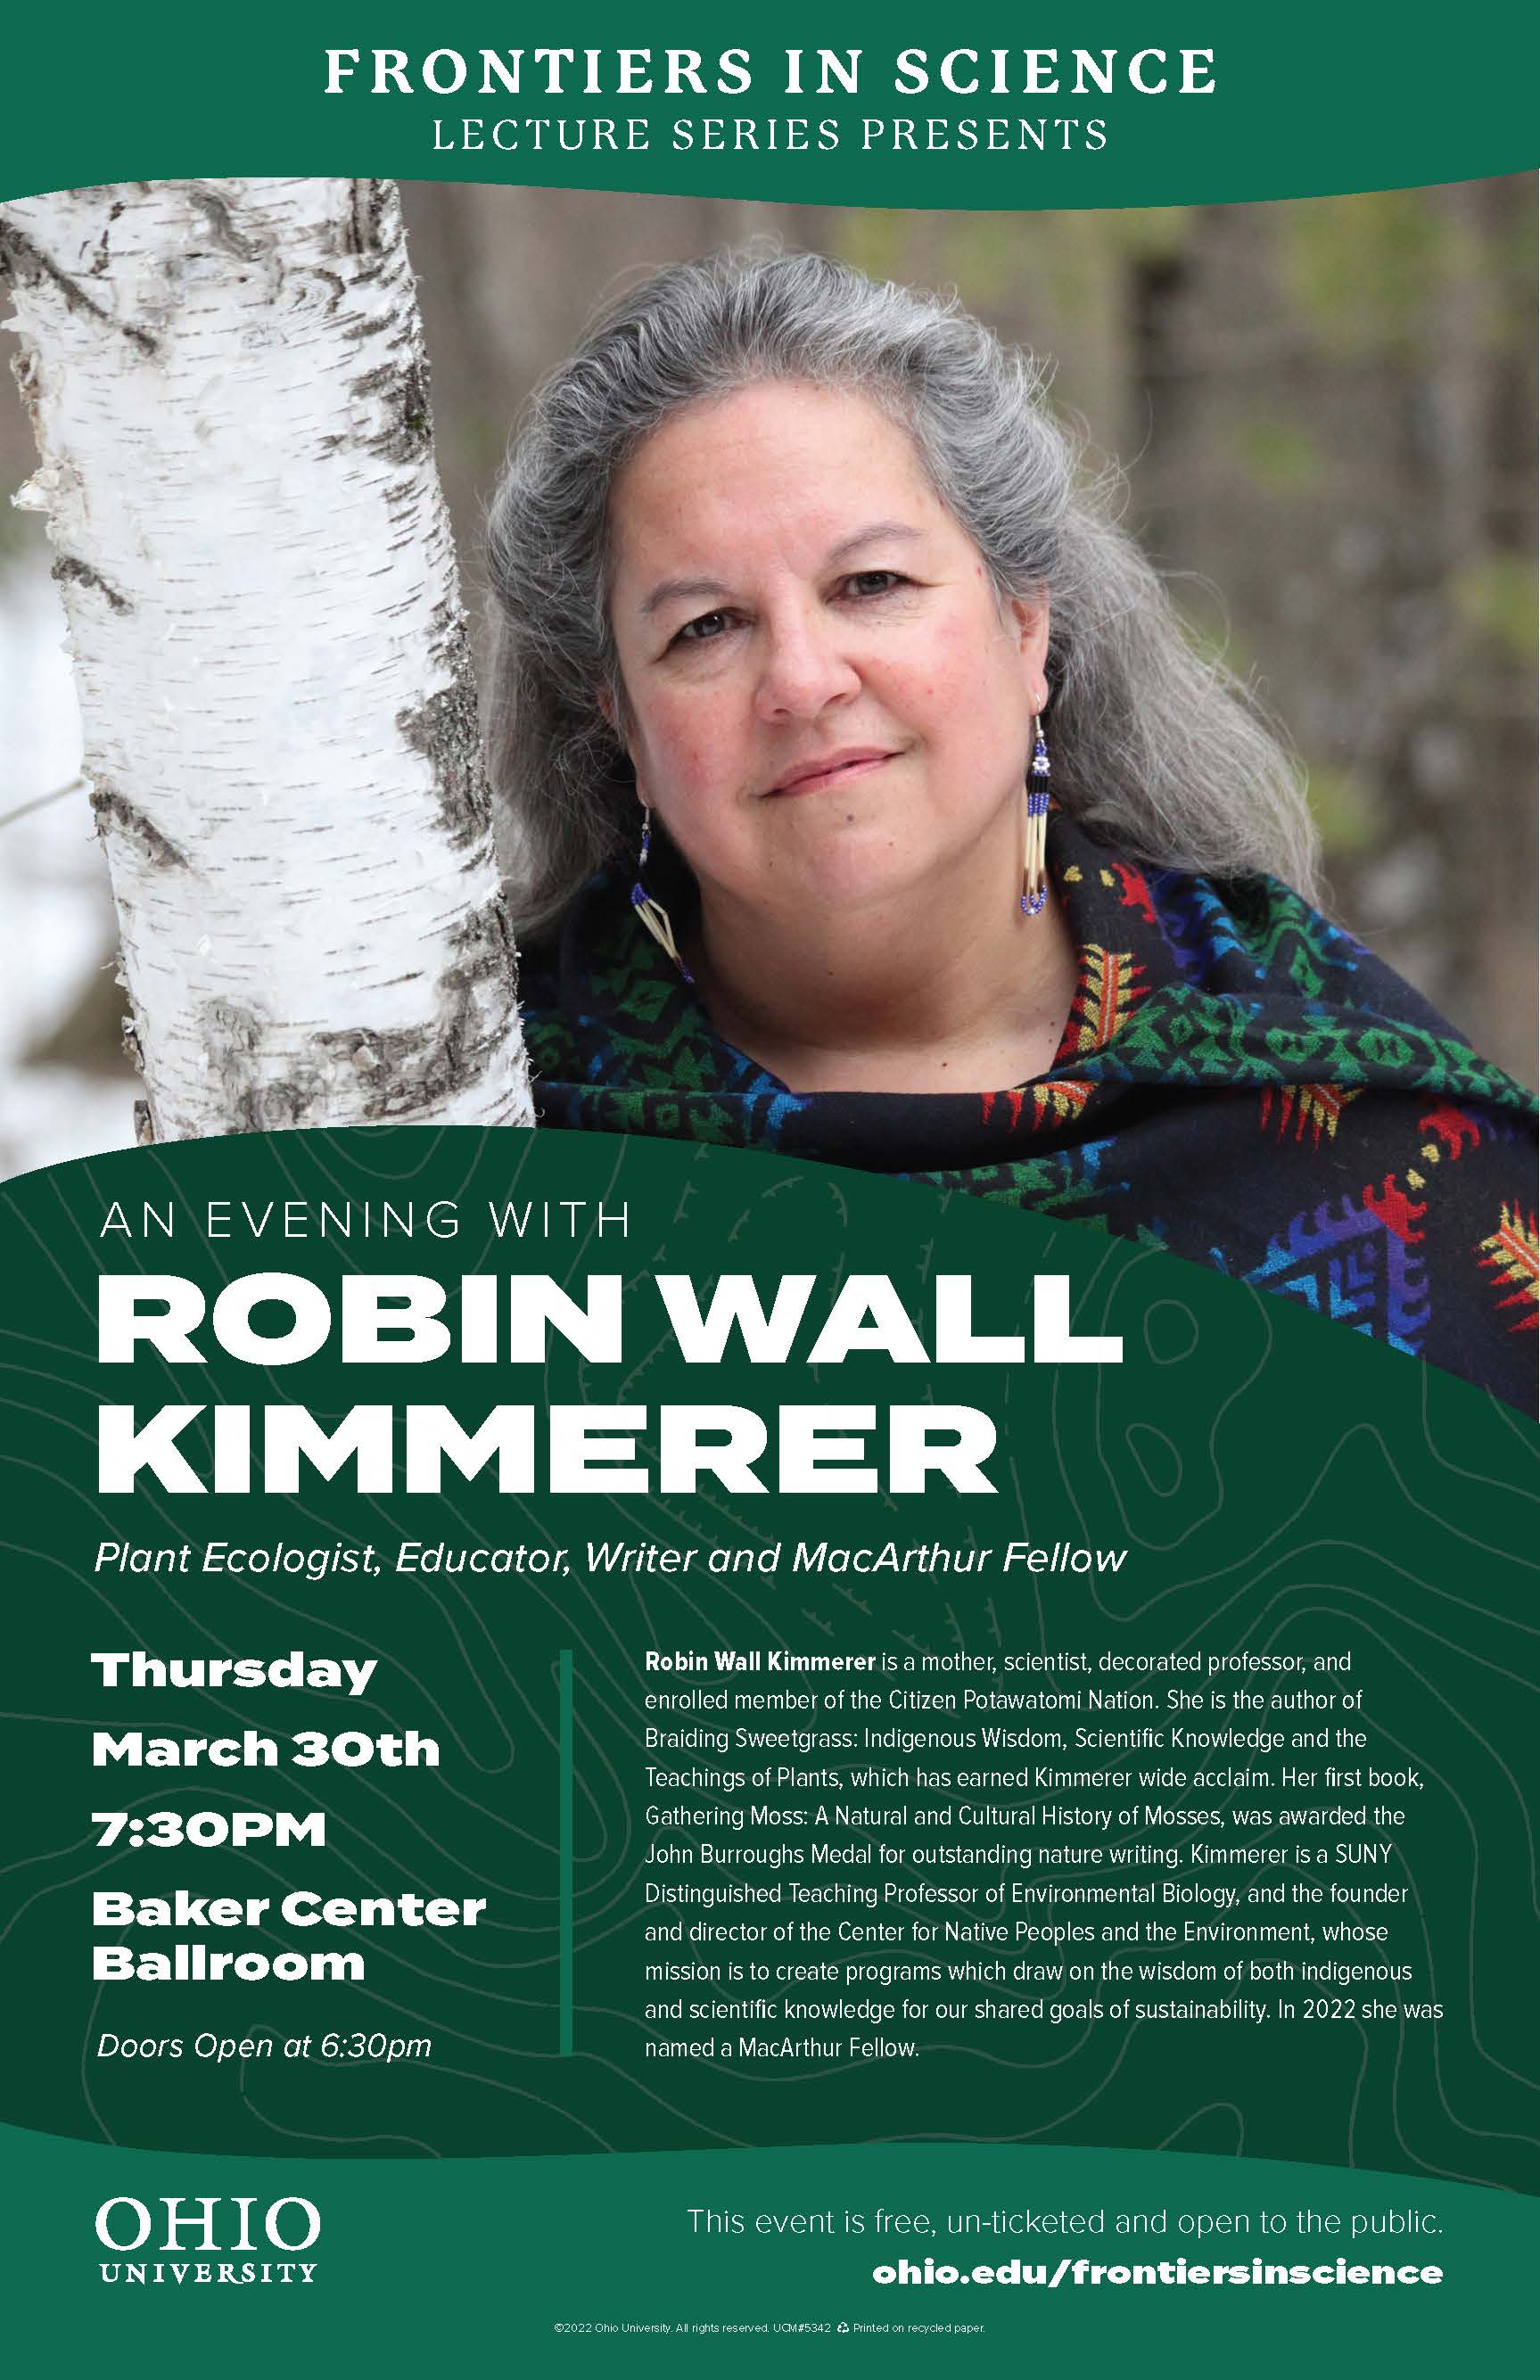 An Evening With Robin Wall Kimmerer, Thursday, March 30